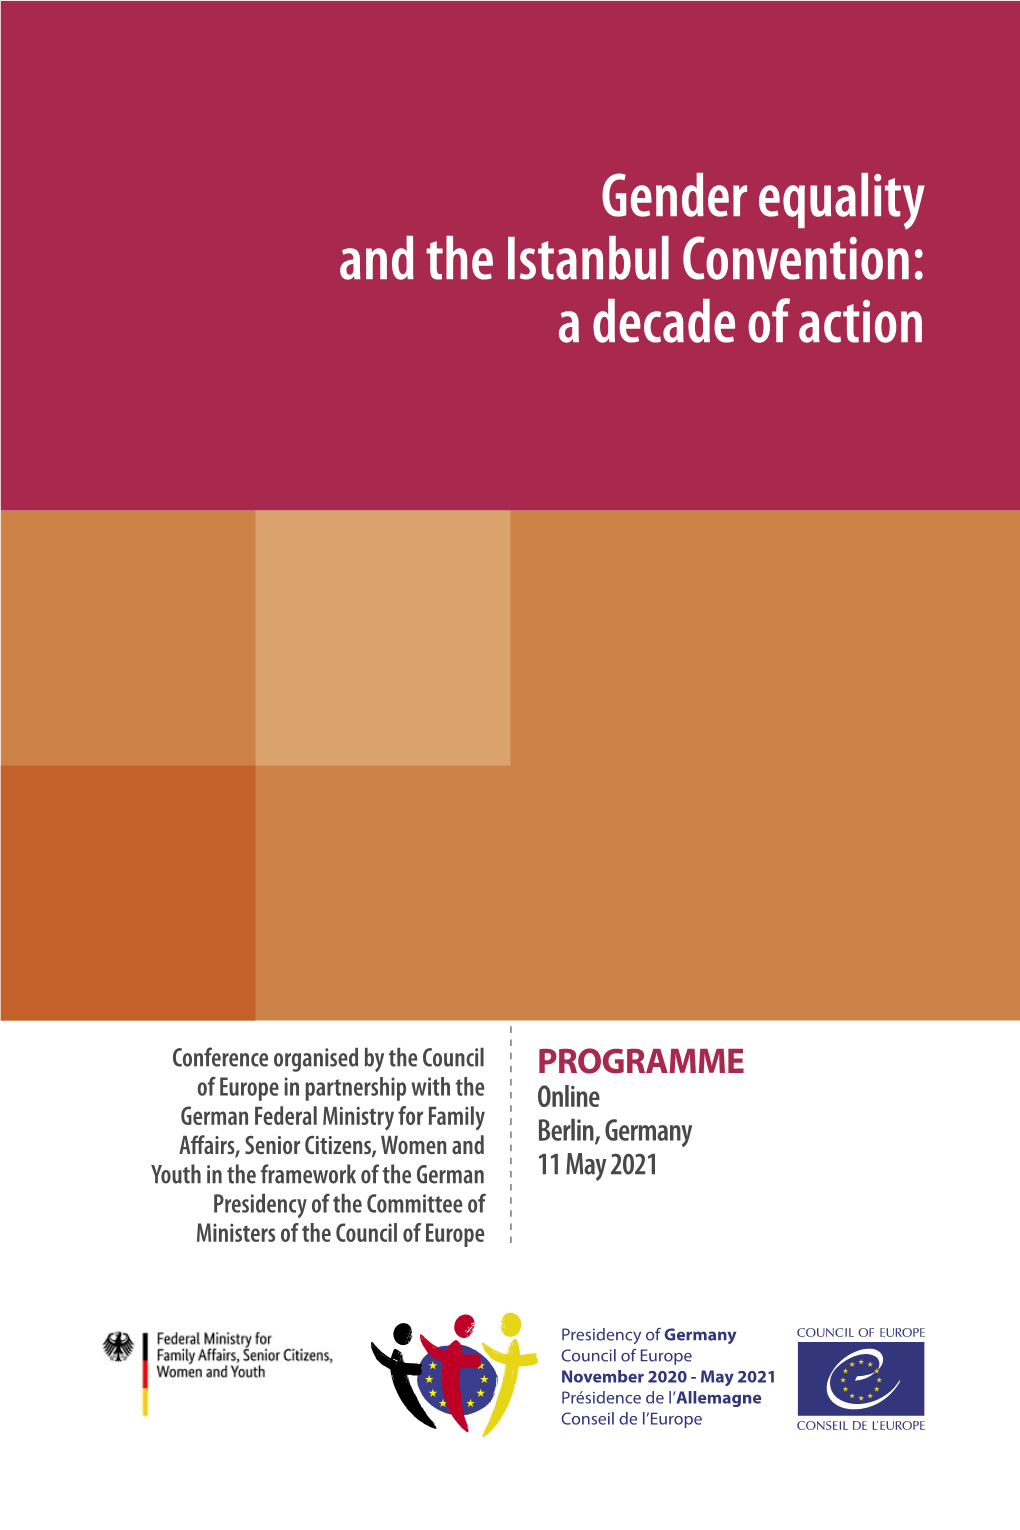 Gender Equality and the Istanbul Convention: a Decade of Action PREMS 053021